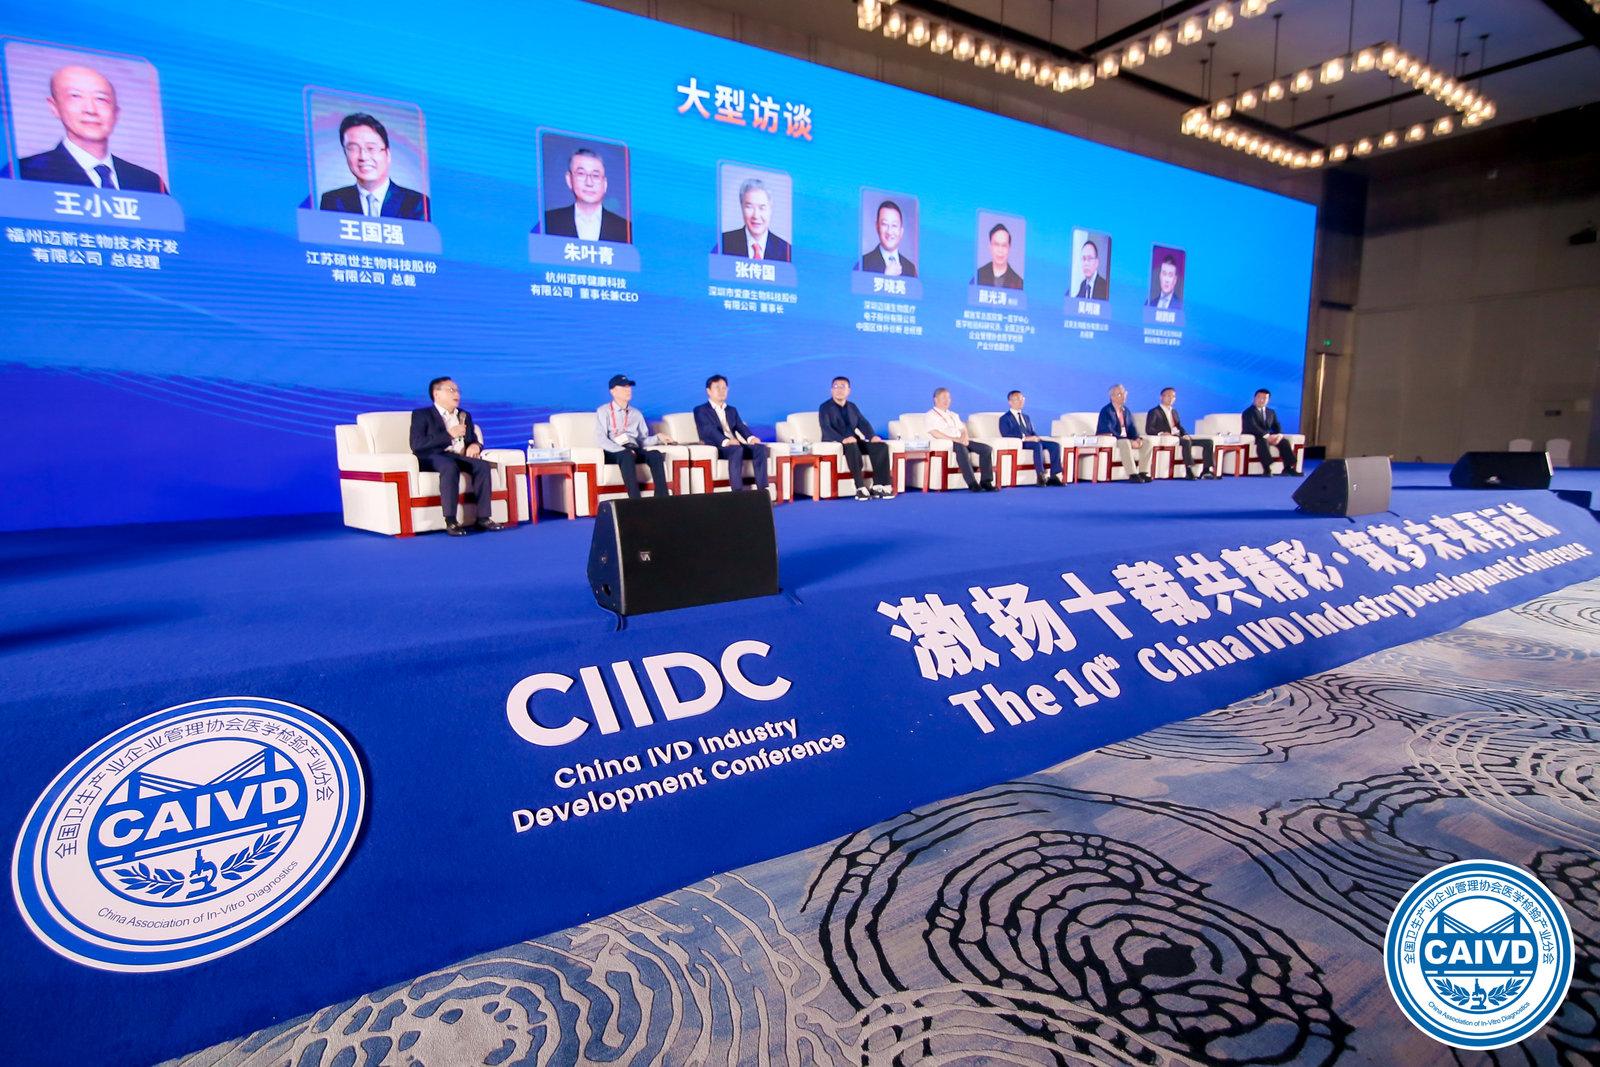 The 10th China IVD Industry Development Conference attracted 160,000 visits